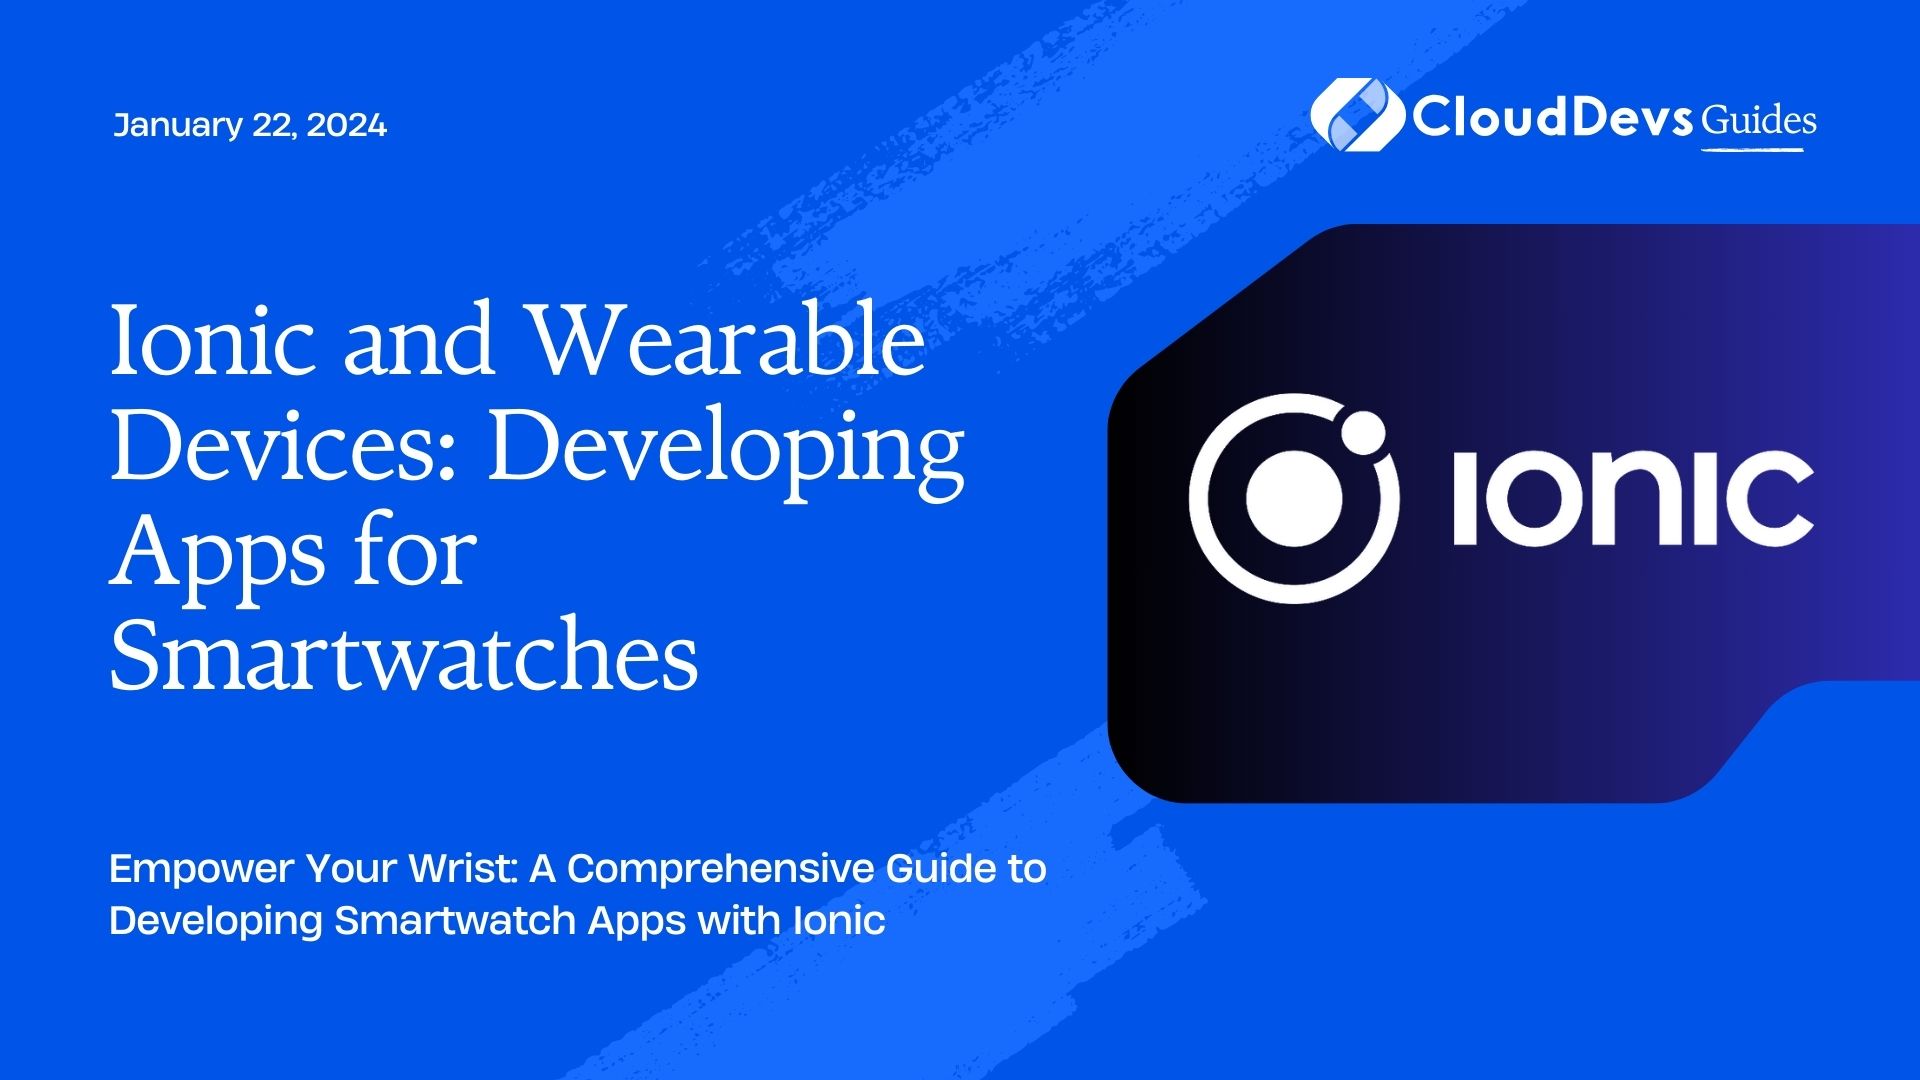 Ionic and Wearable Devices: Developing Apps for Smartwatches